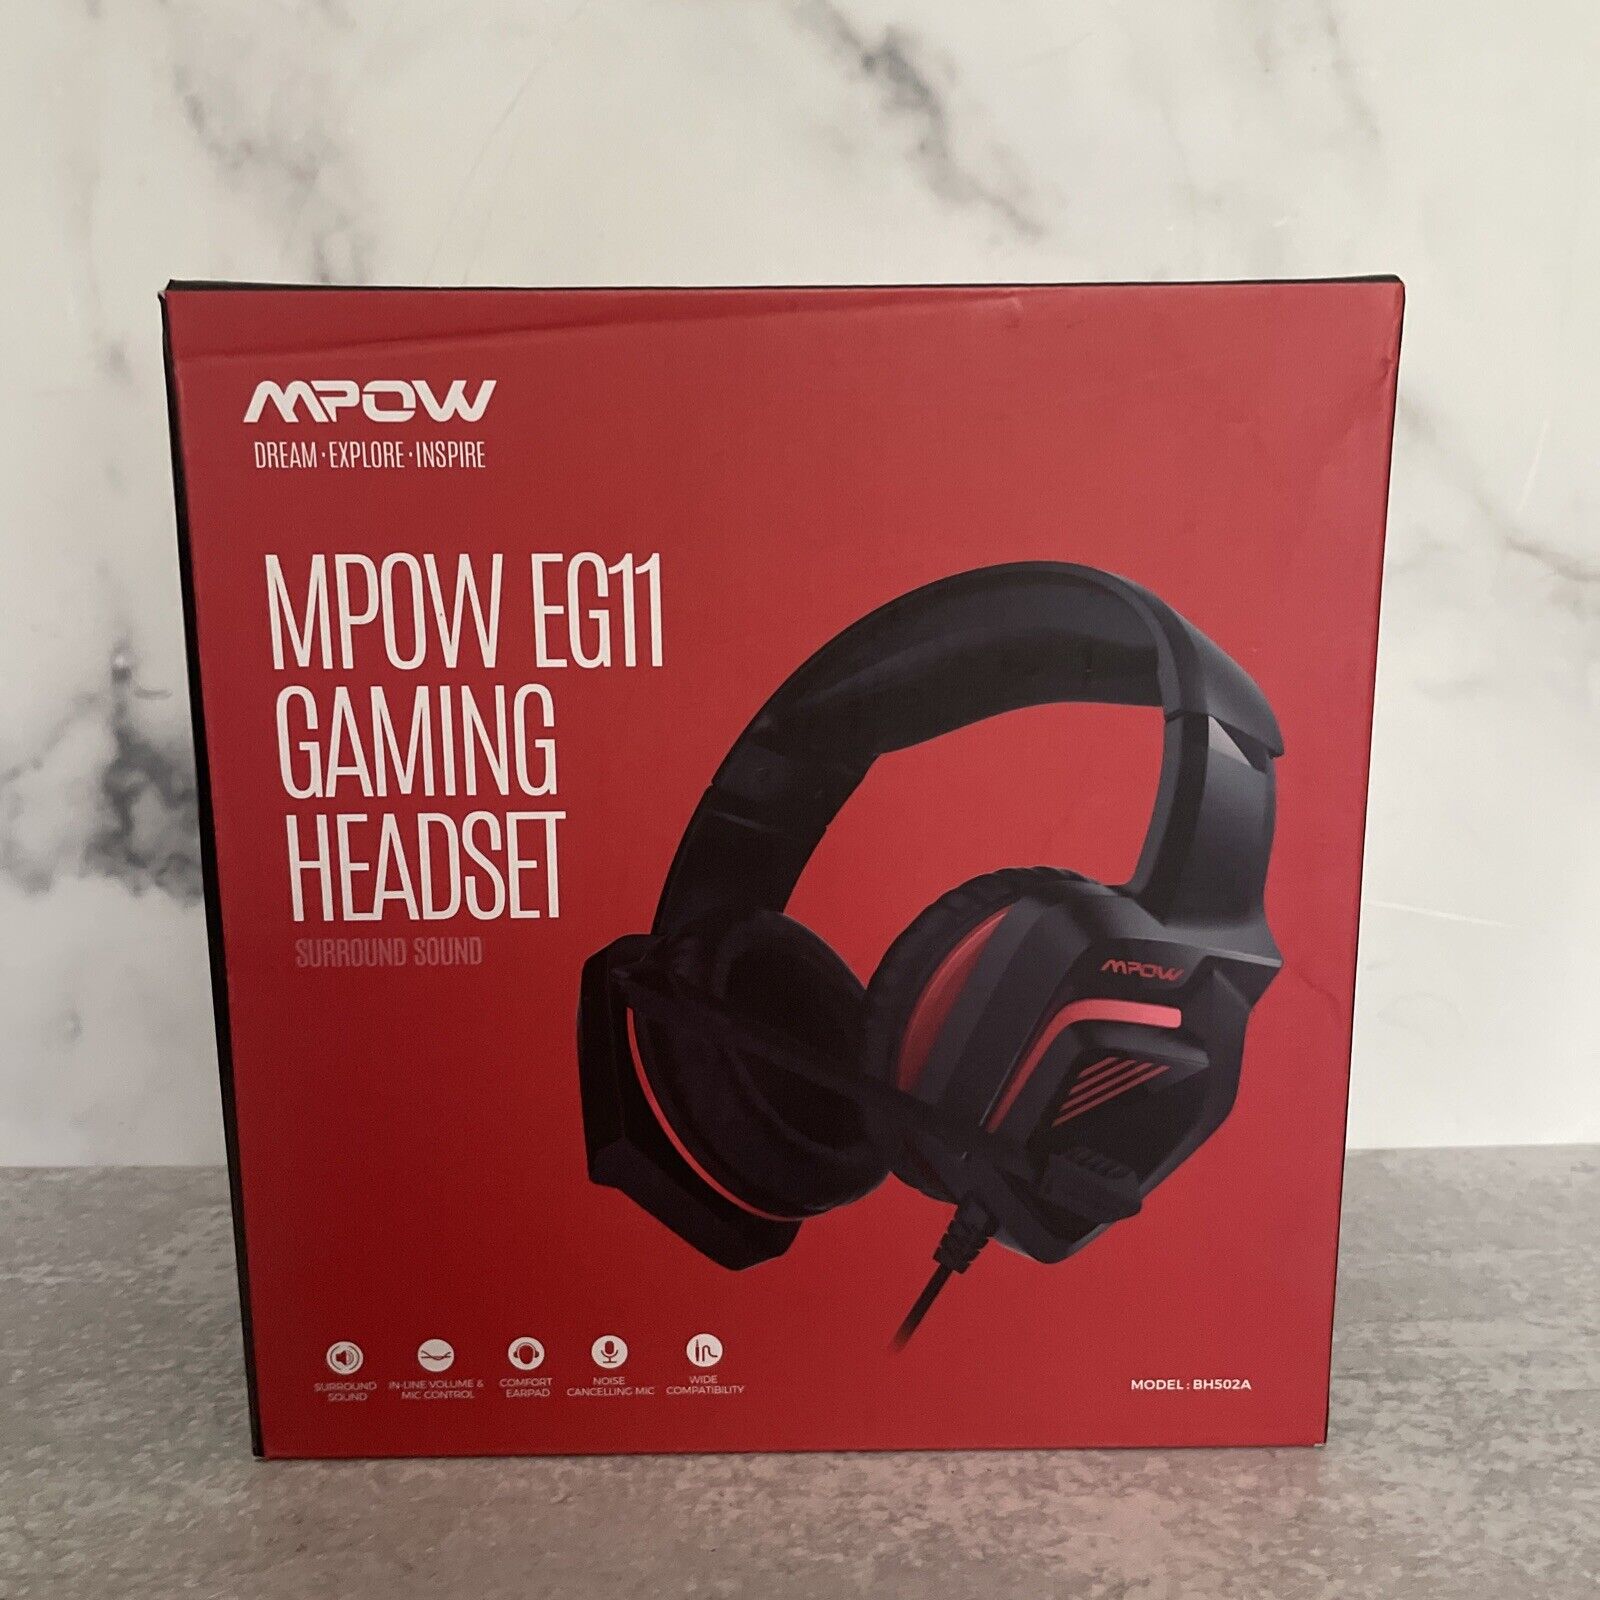 MPOW EG11 Gaming headset Headphones with built in Microphone New